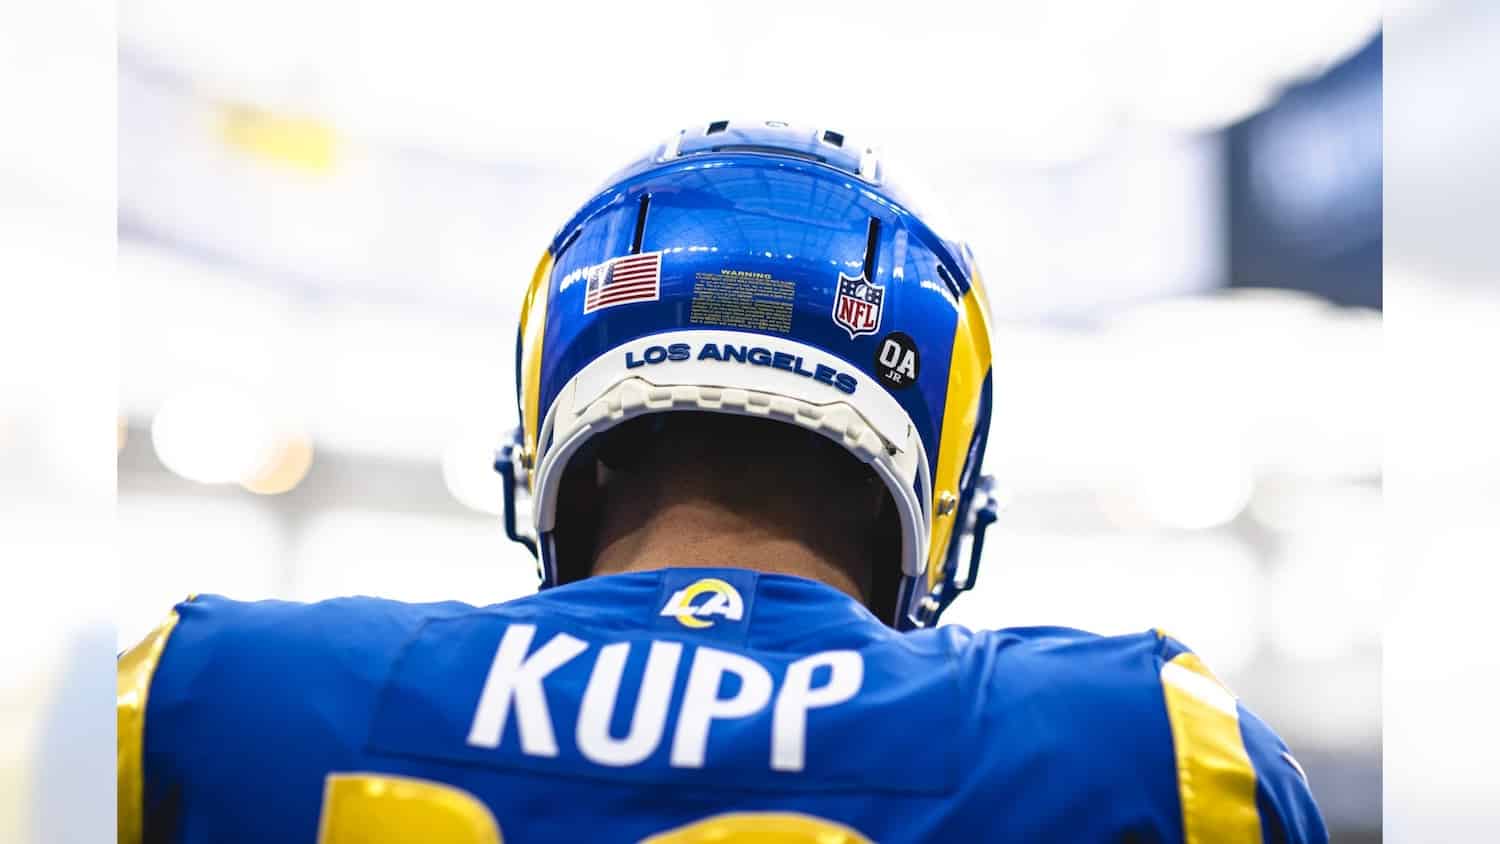 Los Angeles Rams Wide Receiver Cooper Kupp. Photo Credit: Brevin Townsell | LA Rams